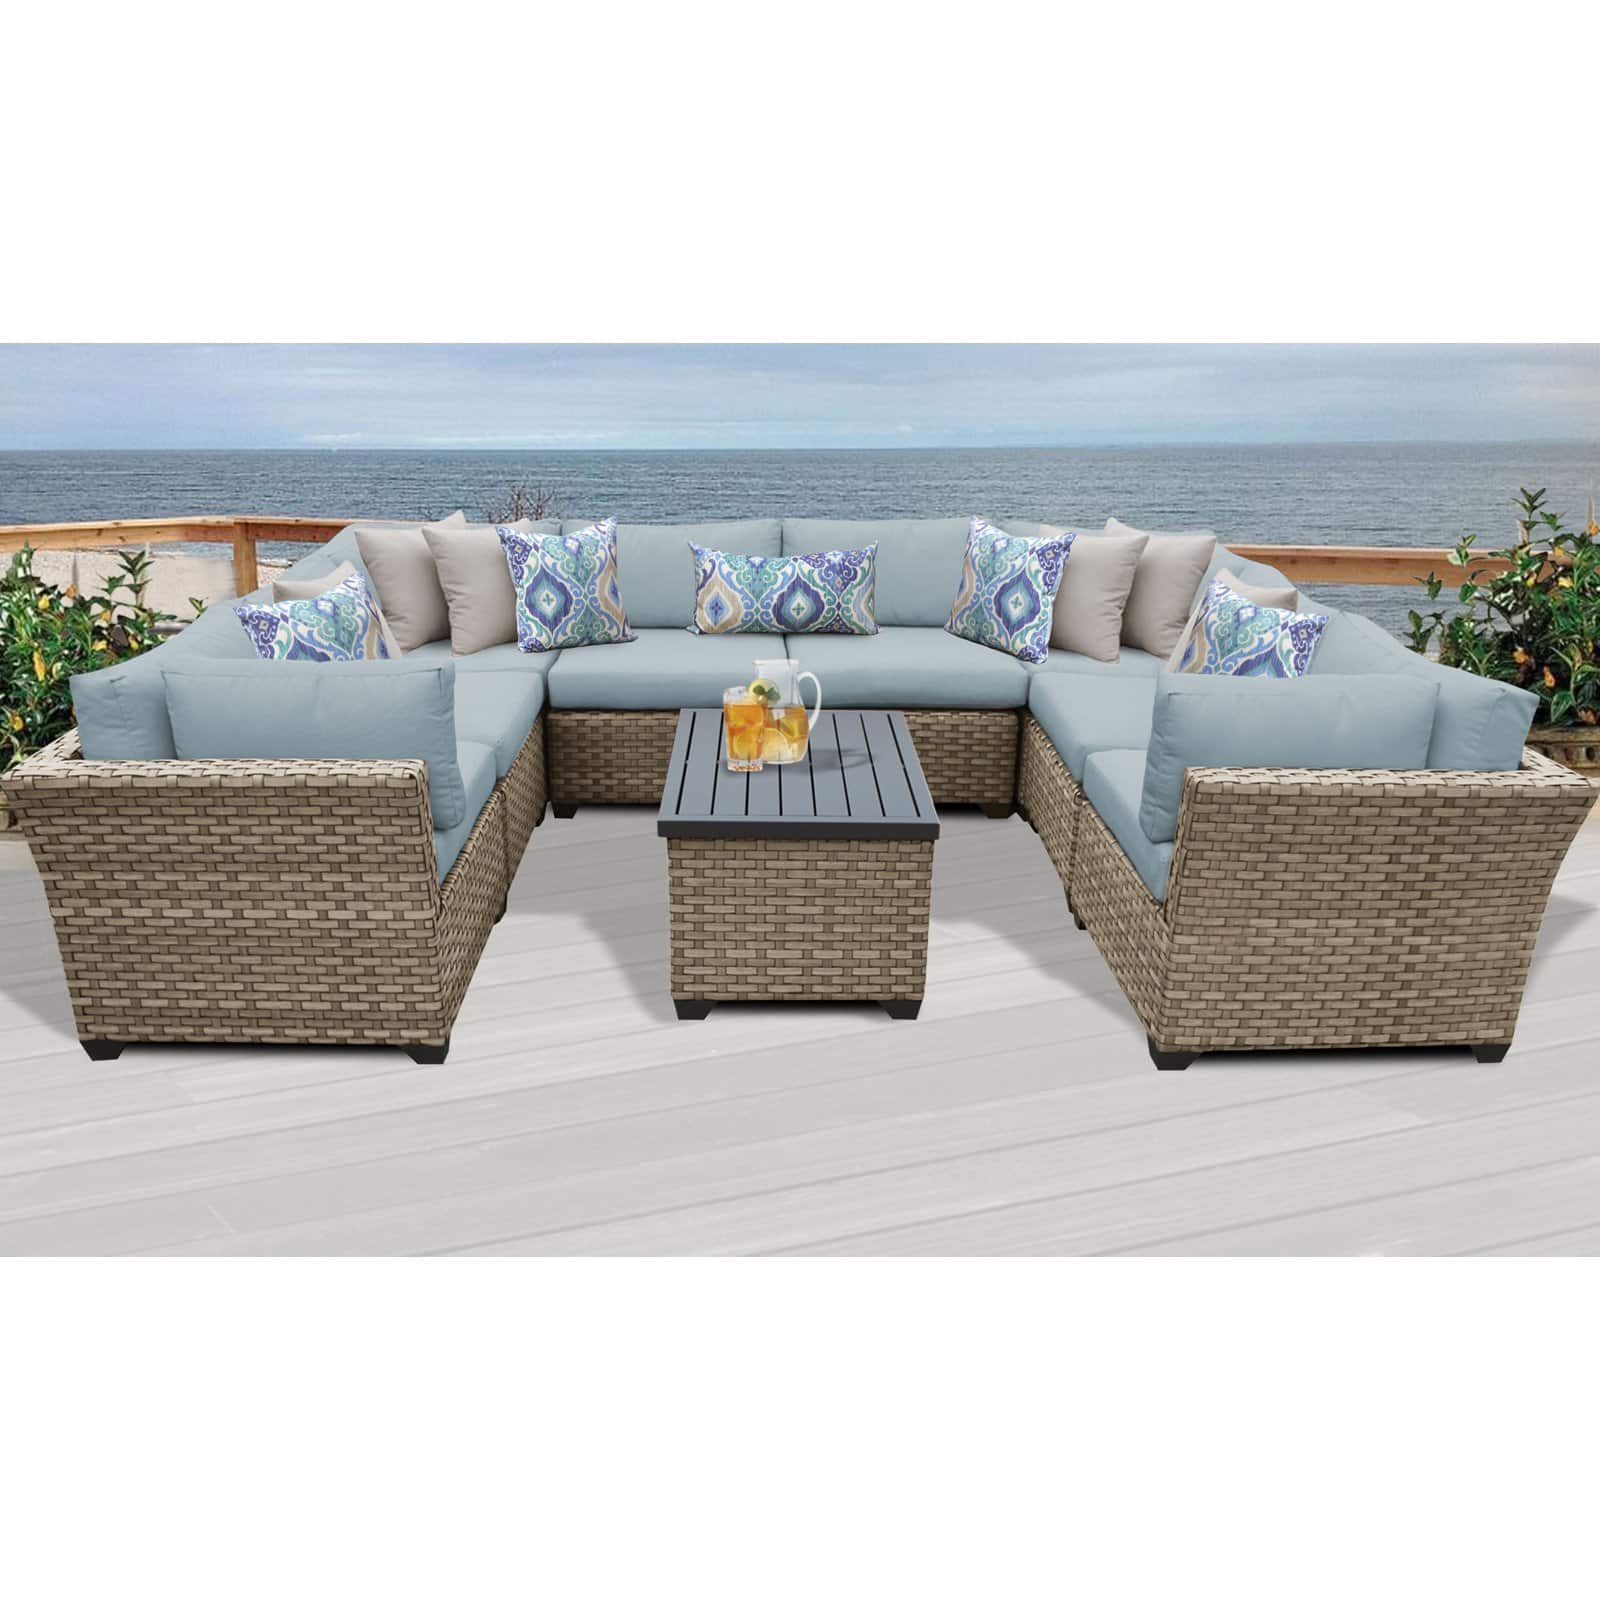 TK Classics Monterey Wicker 9 Piece Patio Conversation Set with Coffee Table and 2 Sets of Cushion Covers - image 5 of 5